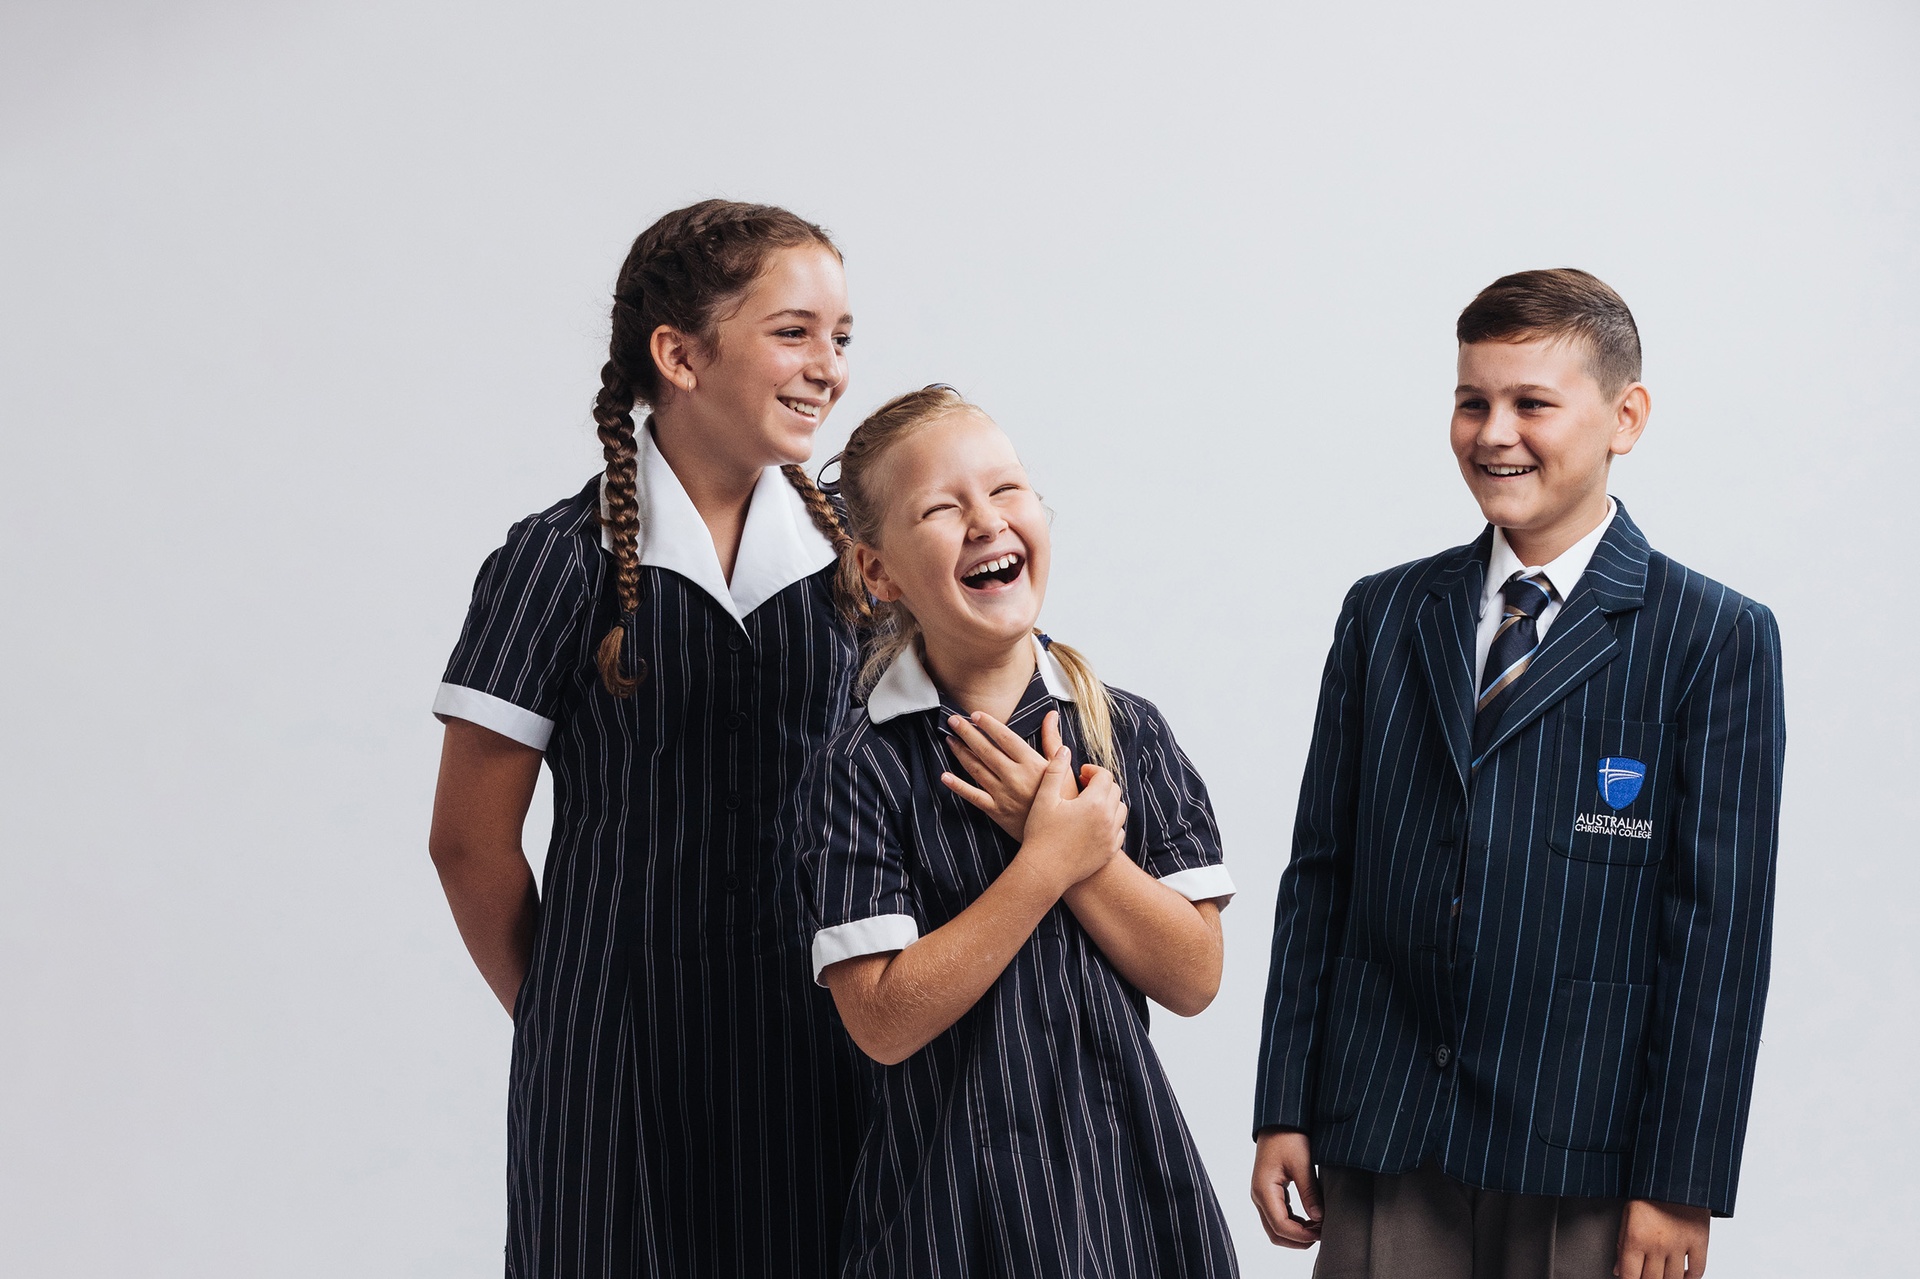 Three ACC Northwest Sydney students in uniform laughing together